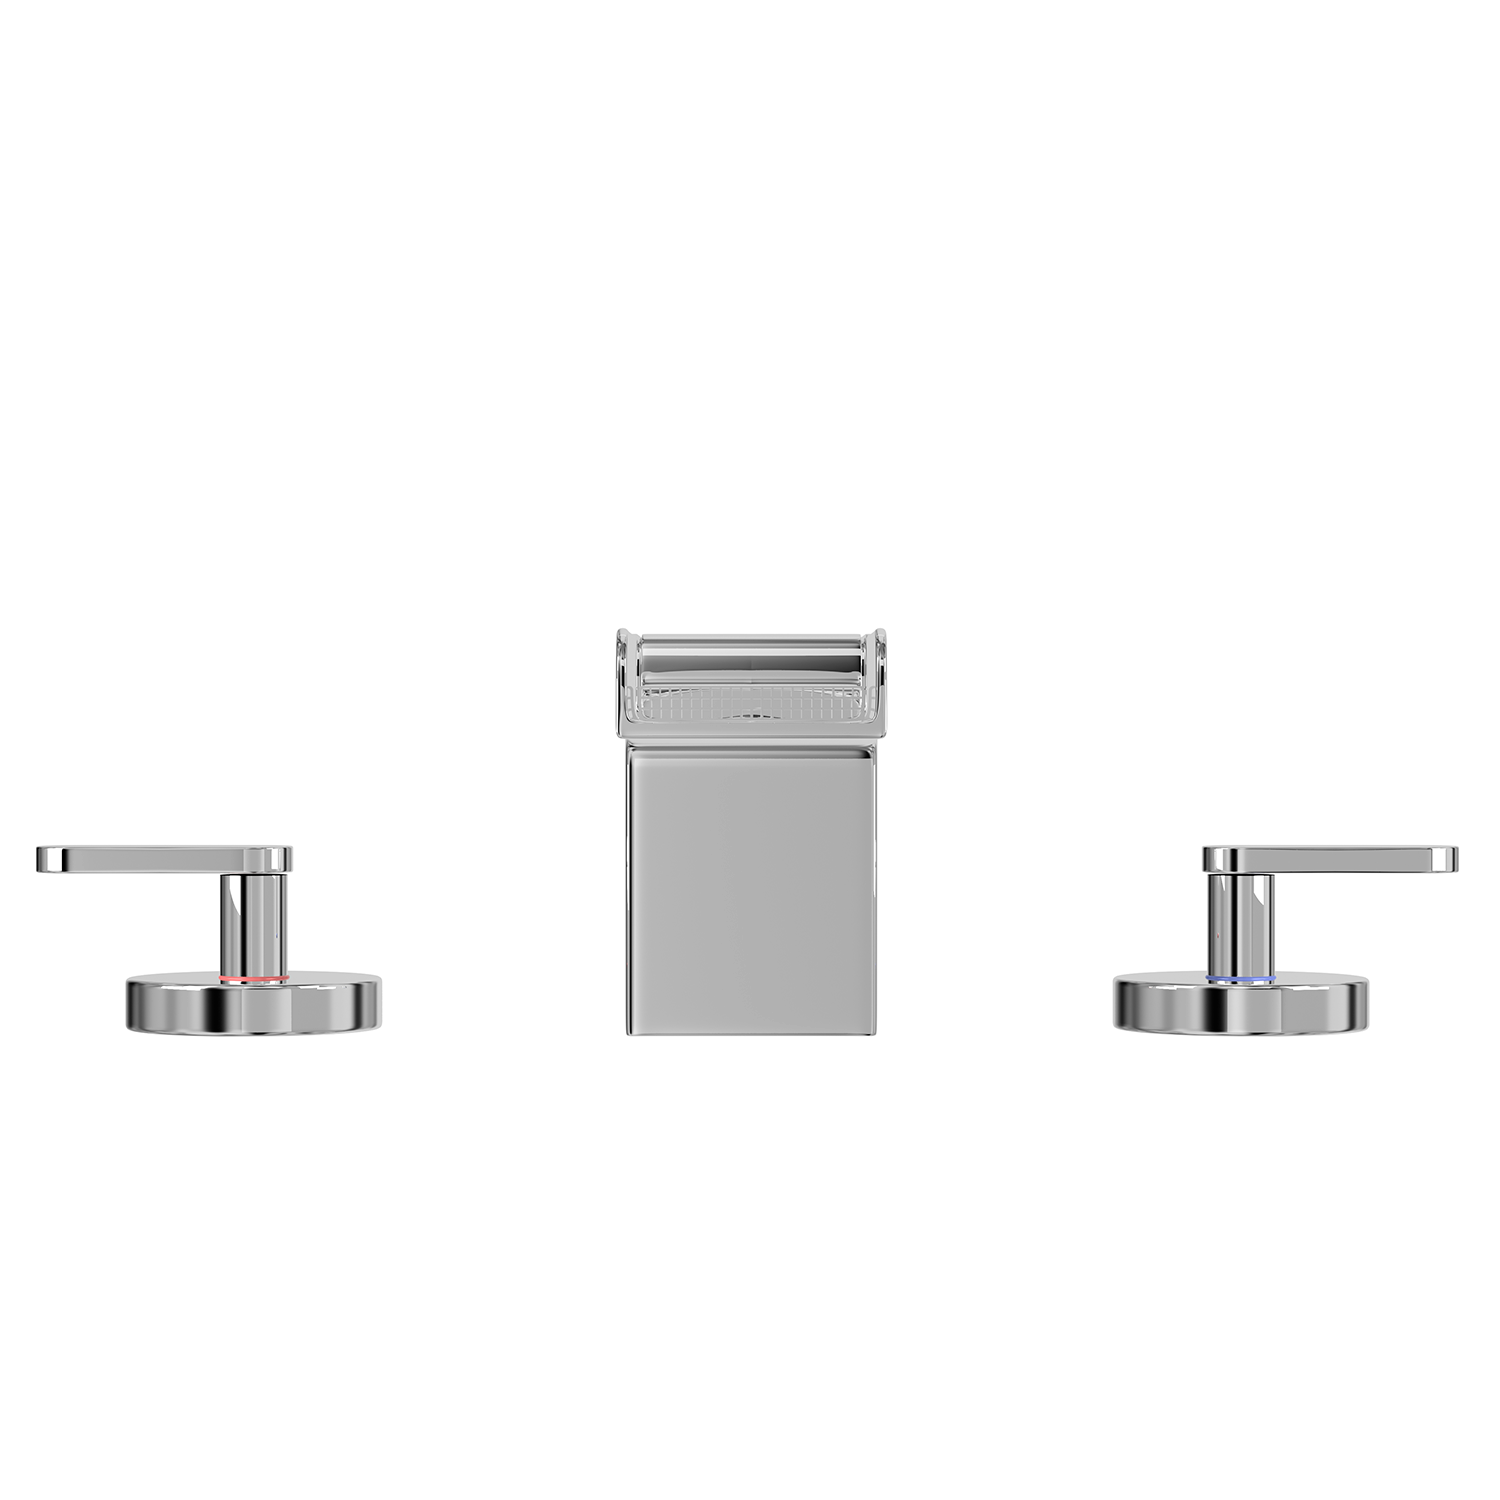 DAX Two Handle Bathroom Faucet, Brass Body, Chrome Finish, 8 x 2-3/8 Inches, (DAX-8255C)